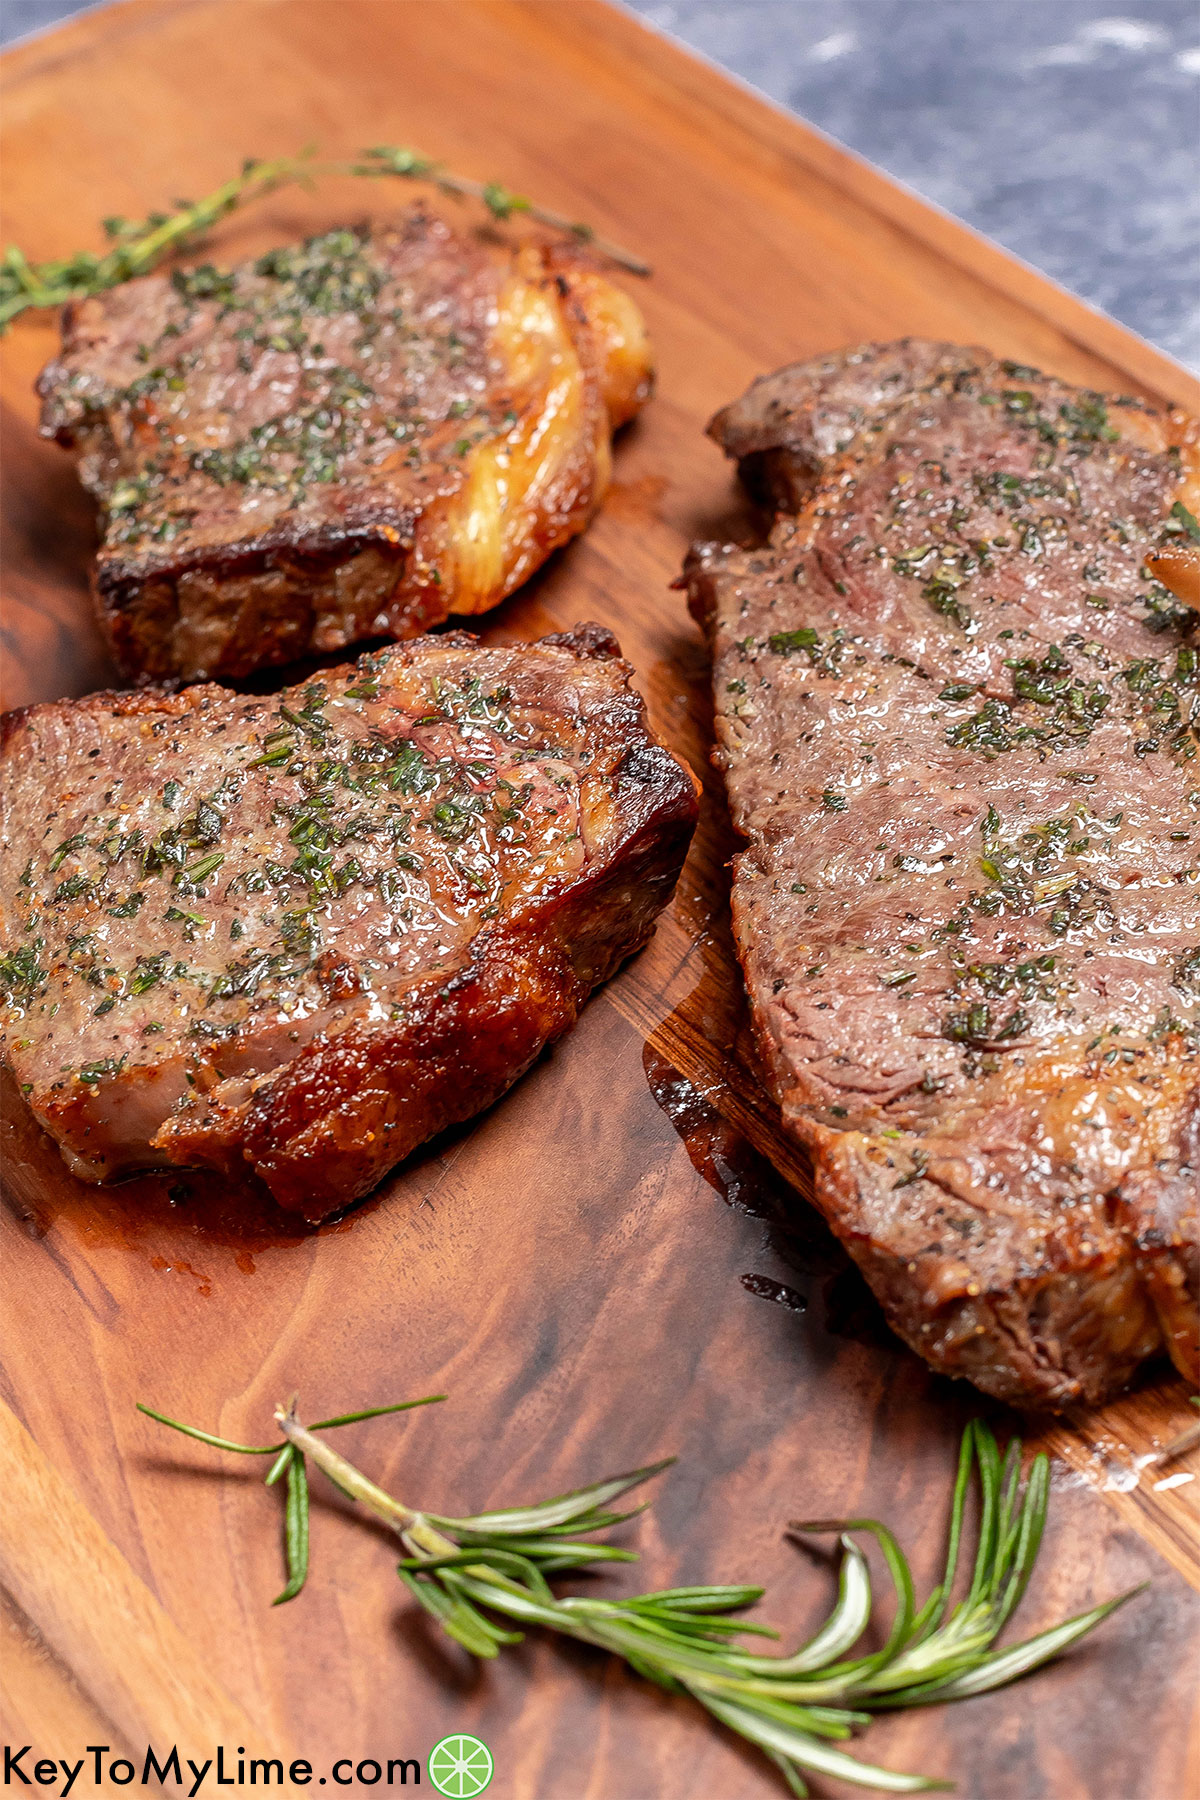 Steaks resting on a wood cutting board with fresh garlic herb butter on top.